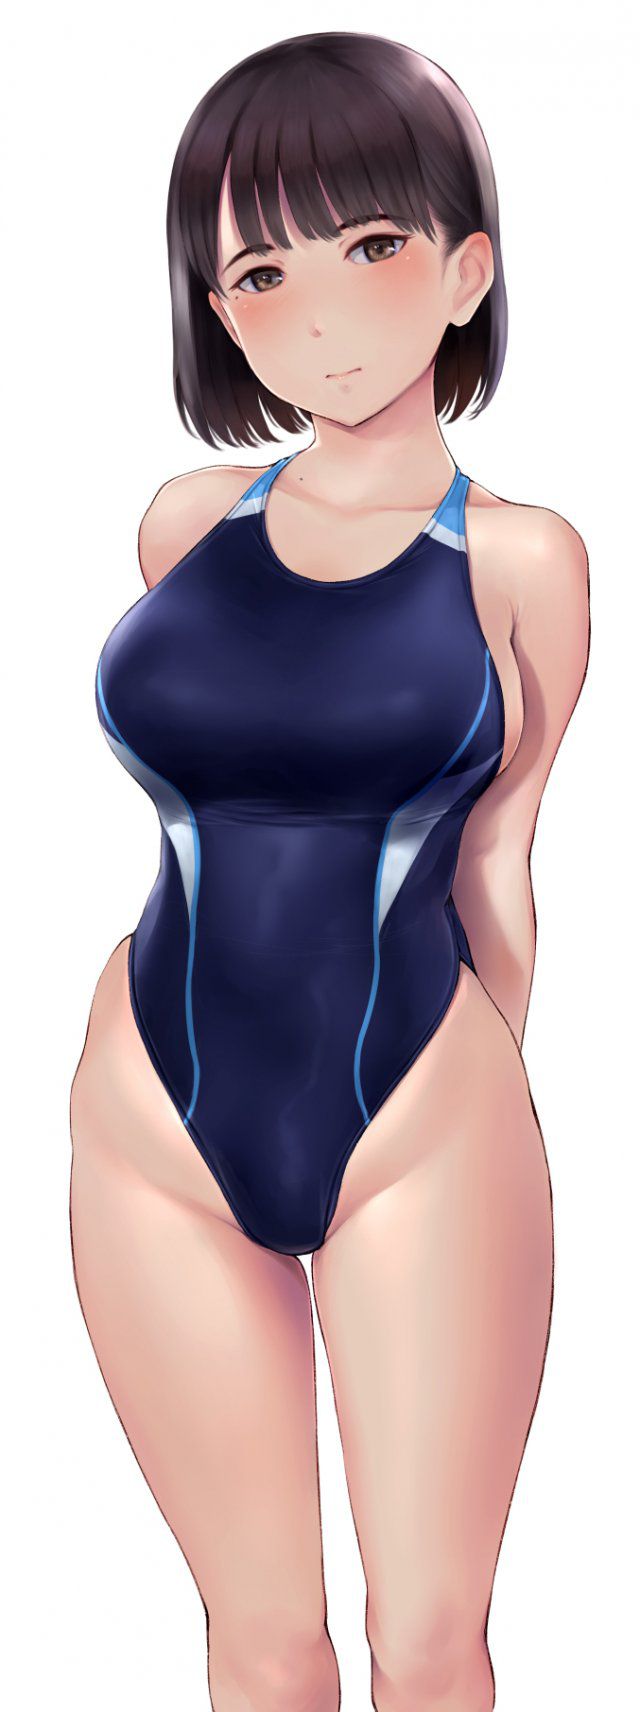 【Secondary】Image of girl in swimming suit Part 2 2